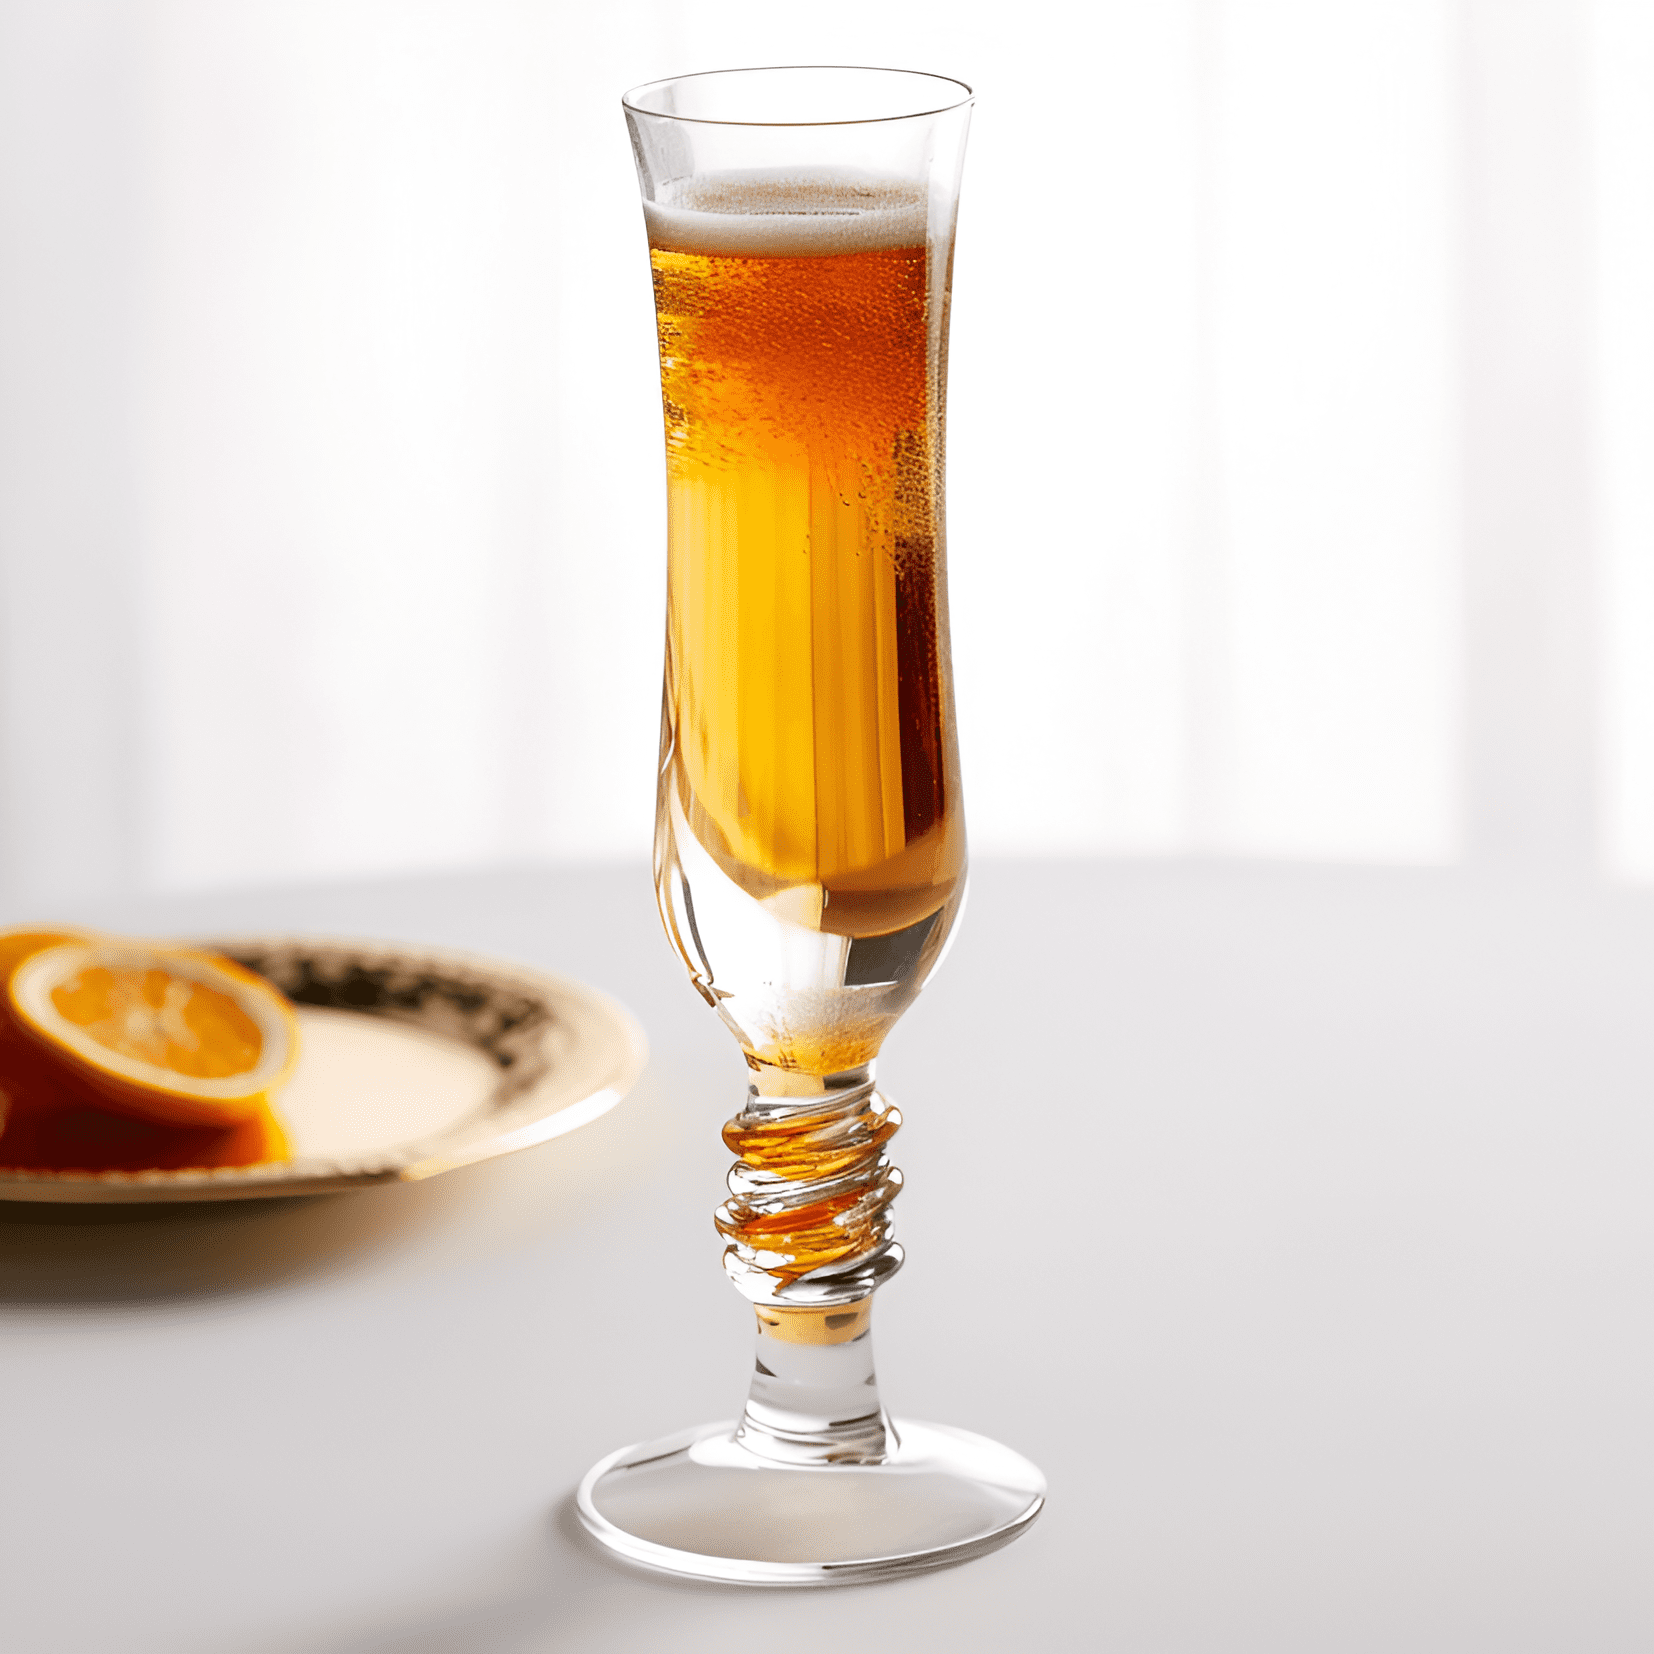 Seelbach Cocktail Recipe - The Seelbach cocktail is a complex and well-balanced drink with a combination of sweet, bitter, and citrus flavors. It has a strong and boozy taste, with a hint of effervescence from the champagne.